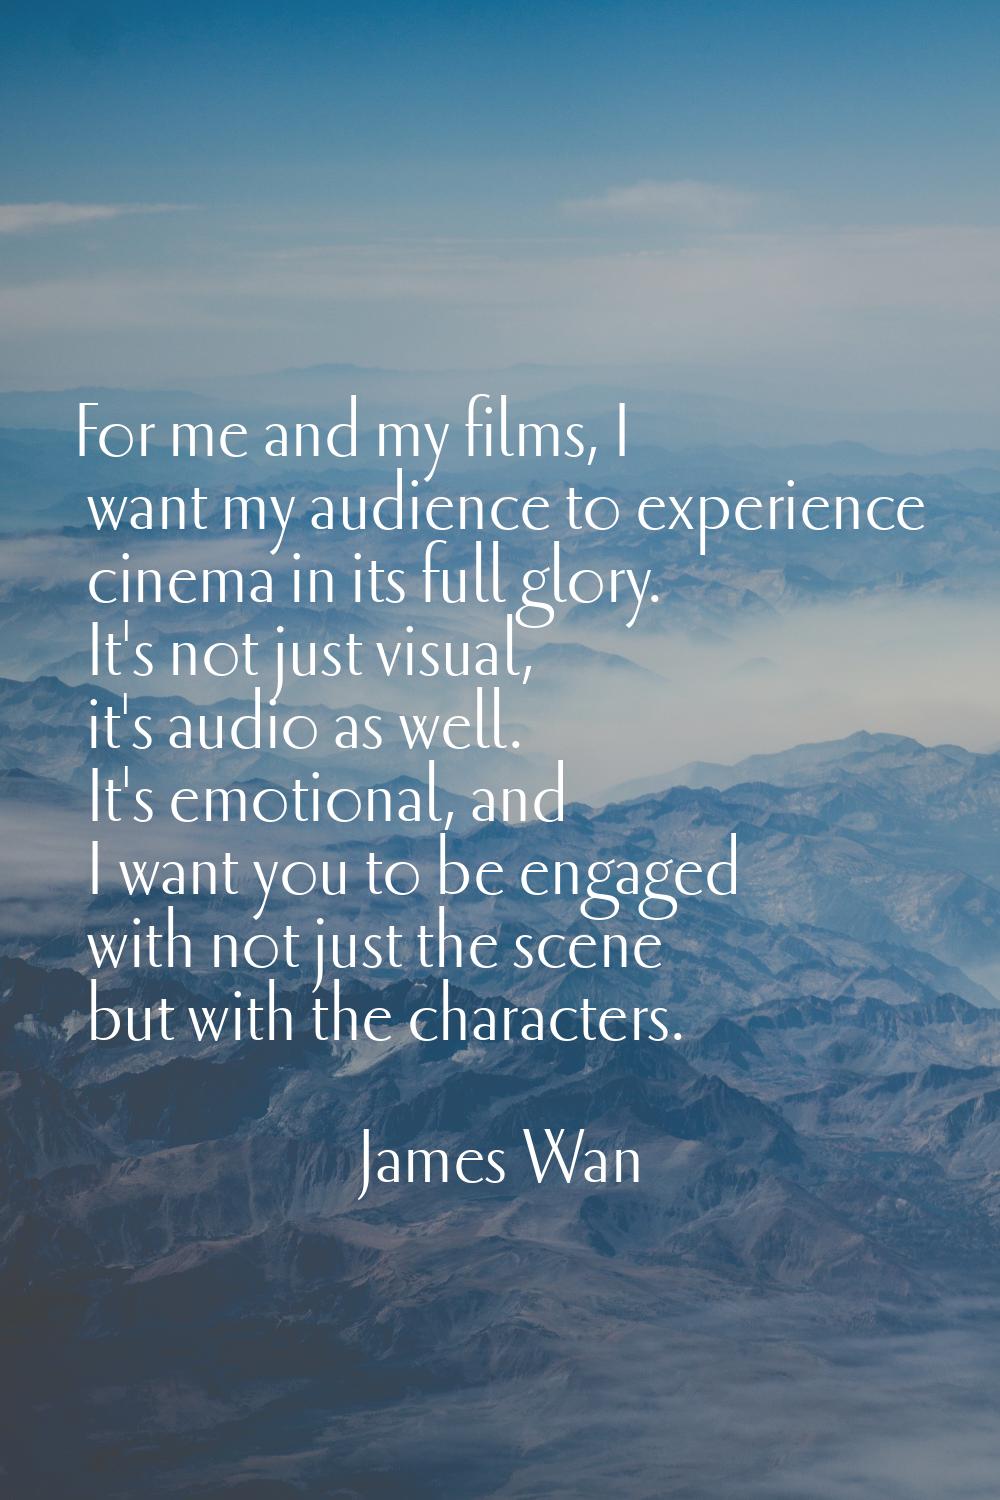 For me and my films, I want my audience to experience cinema in its full glory. It's not just visua